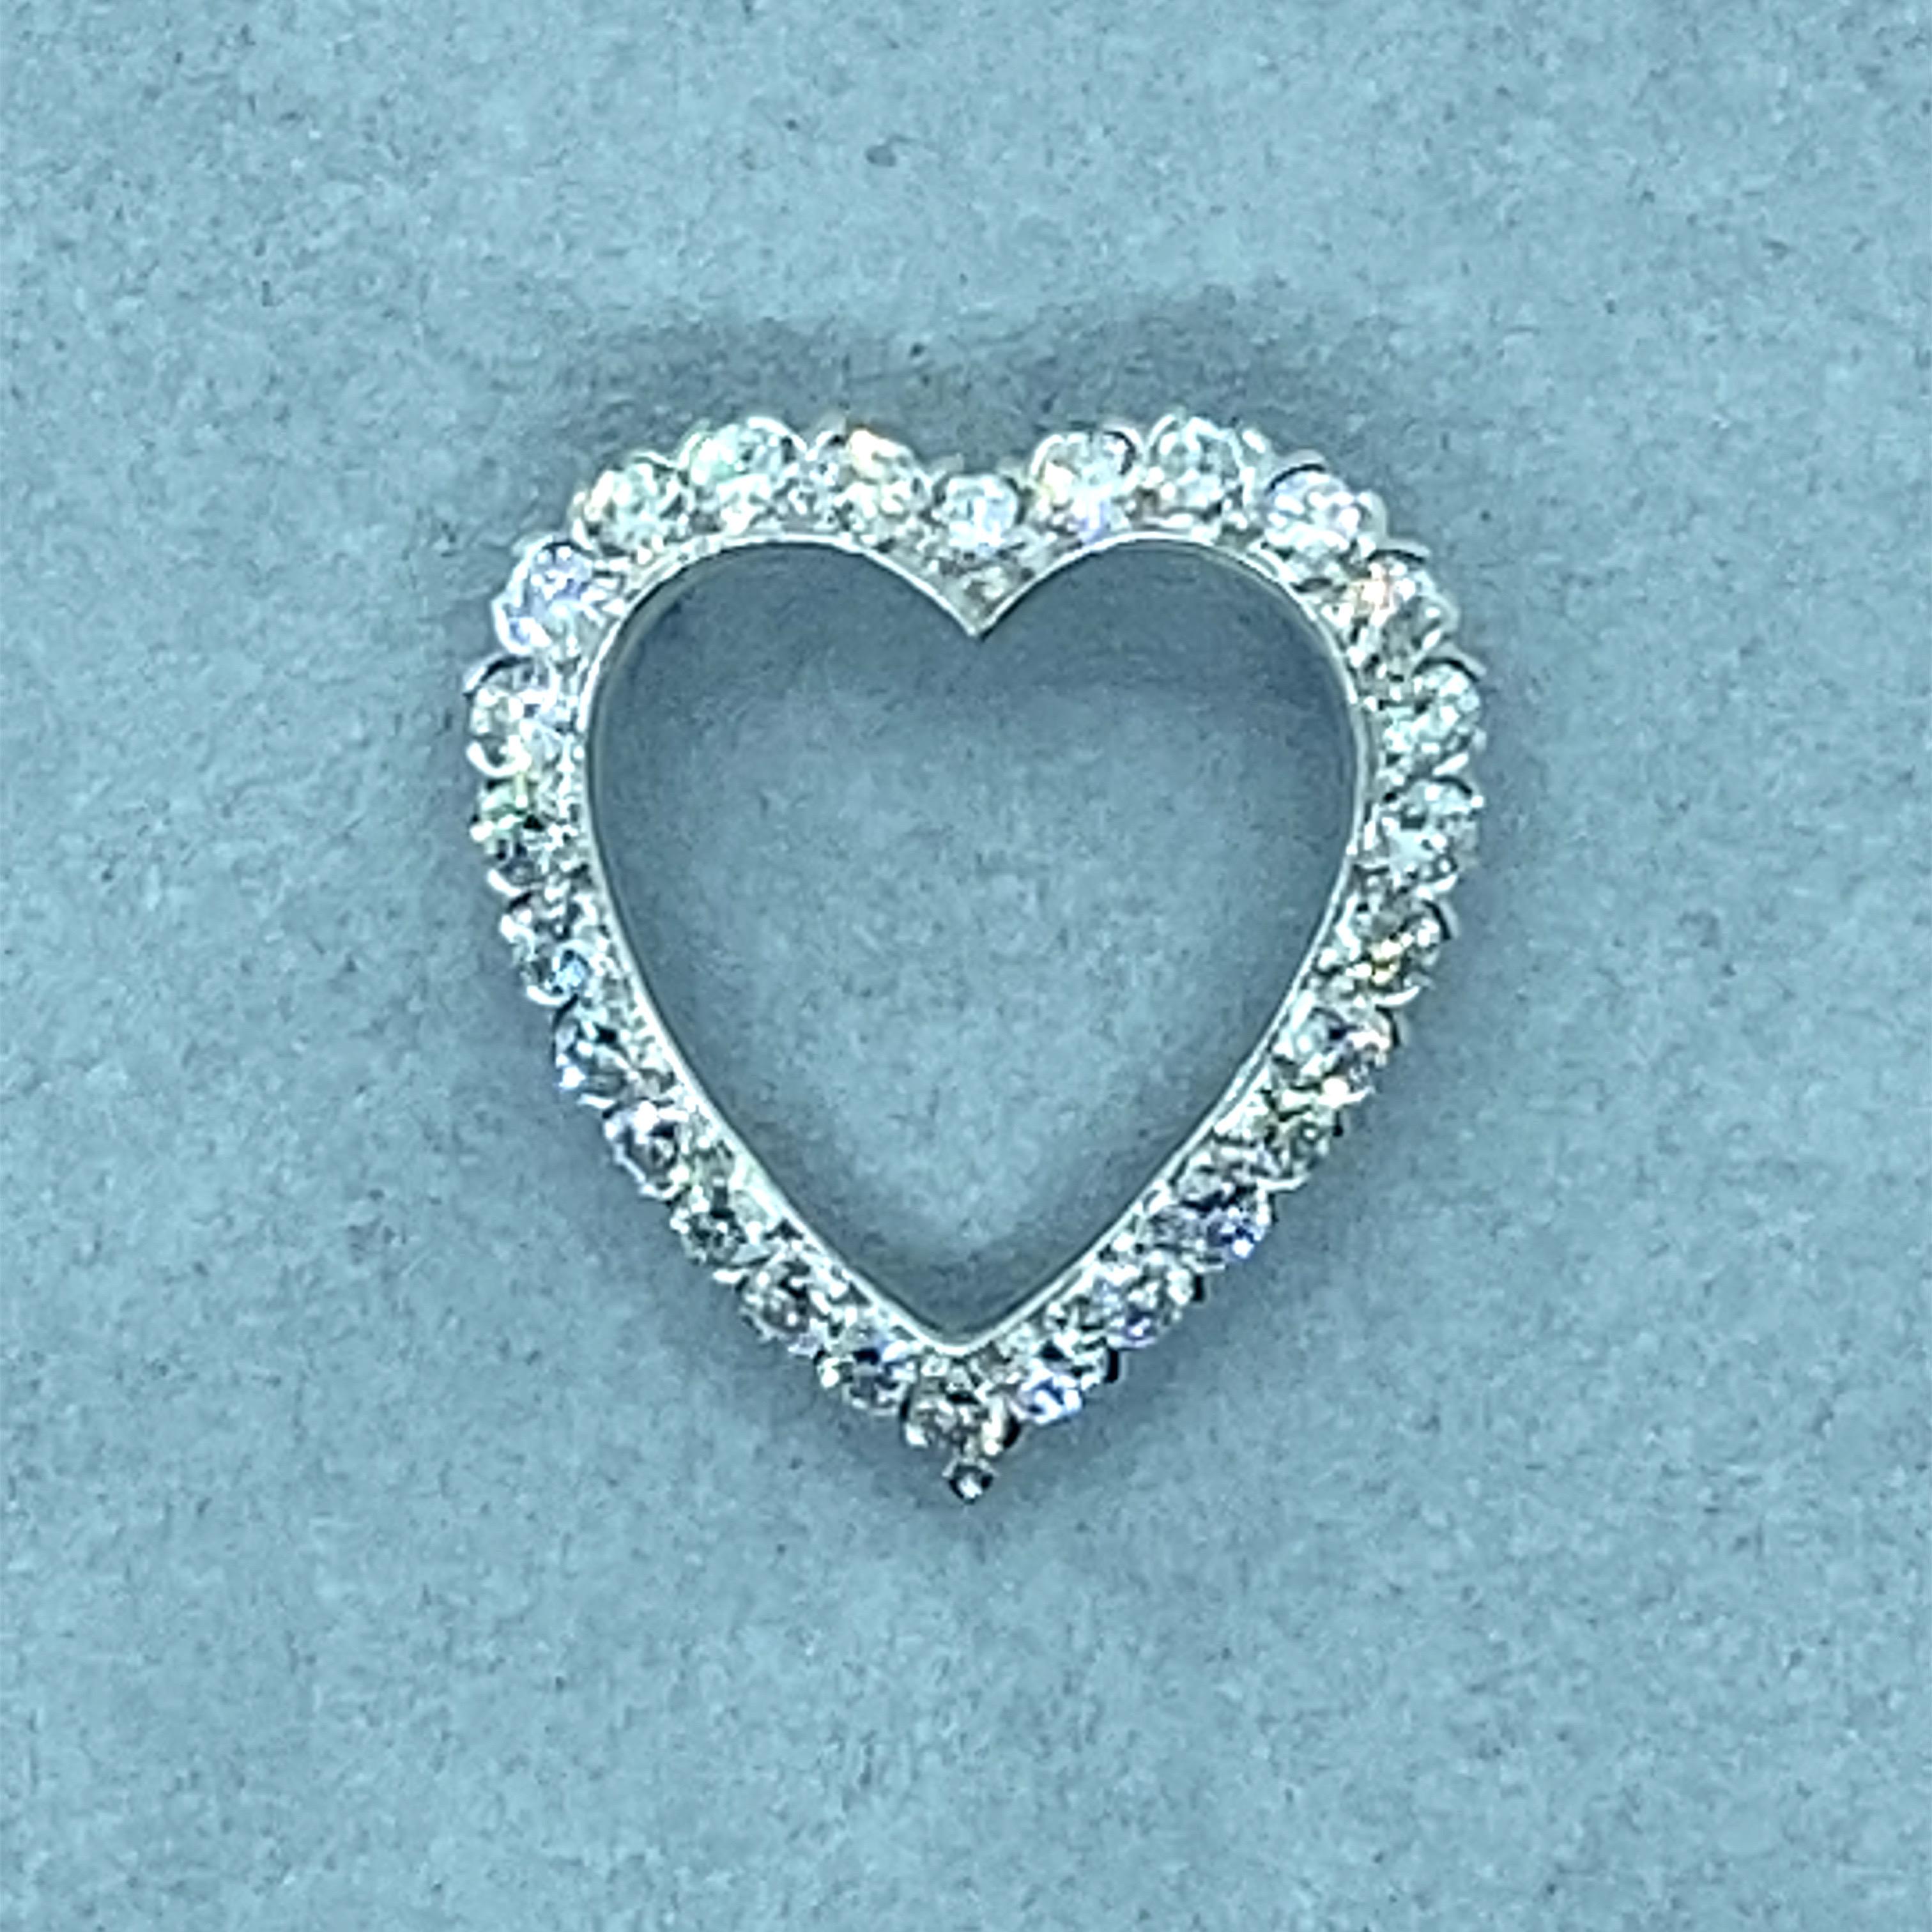 Vintage 1950’s Platinum Diamond Heart Pin and Pendant In Good Condition For Sale In Boston, MA